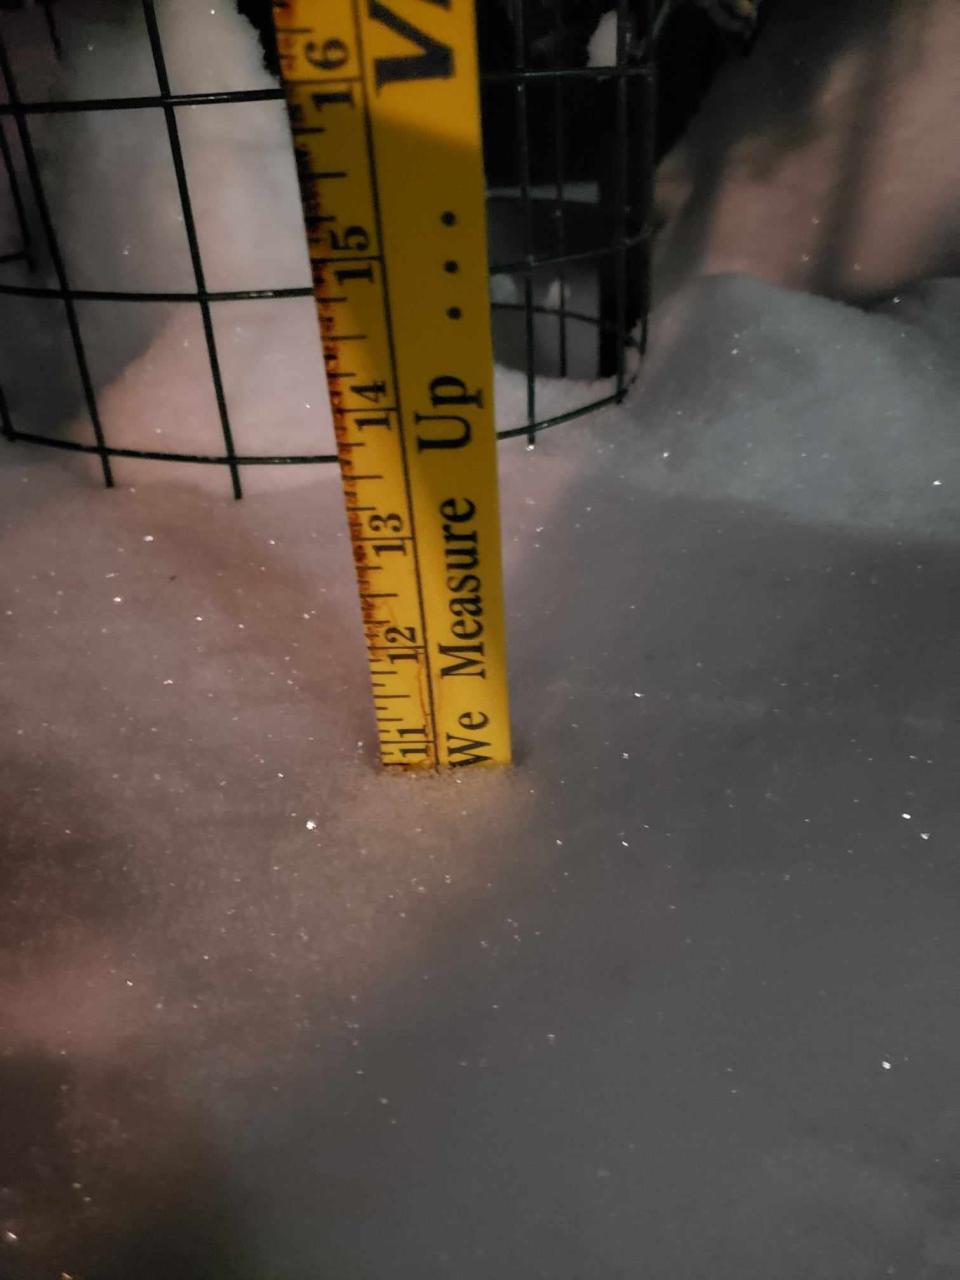 Around 11 inches of snow fell in Deersville in Harrison County Friday night.